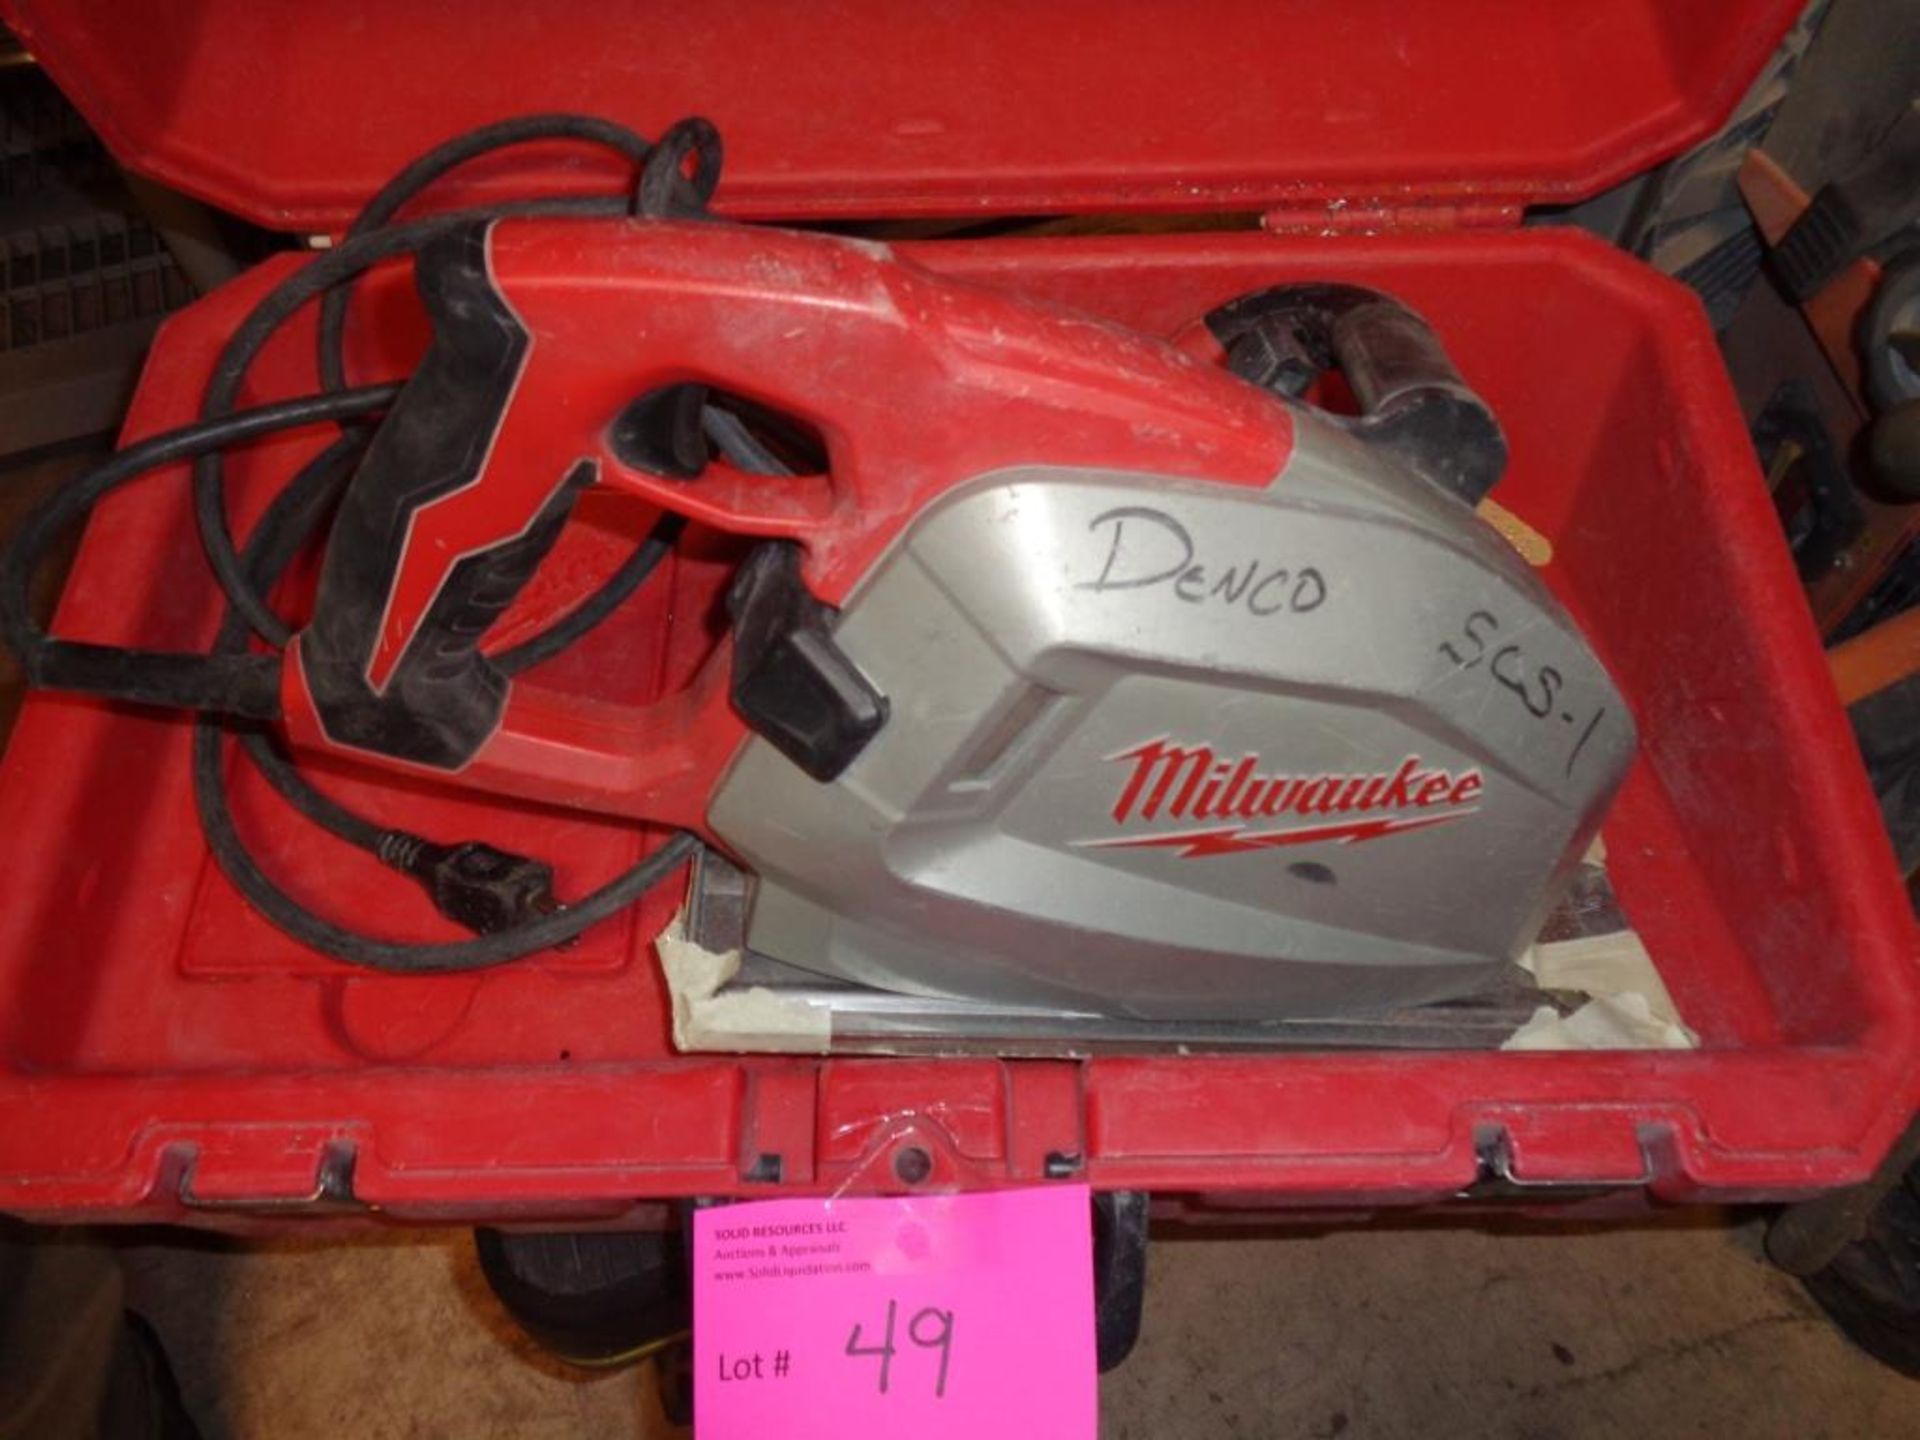 MILWAUKEE CIRCULAR SAW, 7 1/4 INCH, METAL, CORDED, WITH CASE